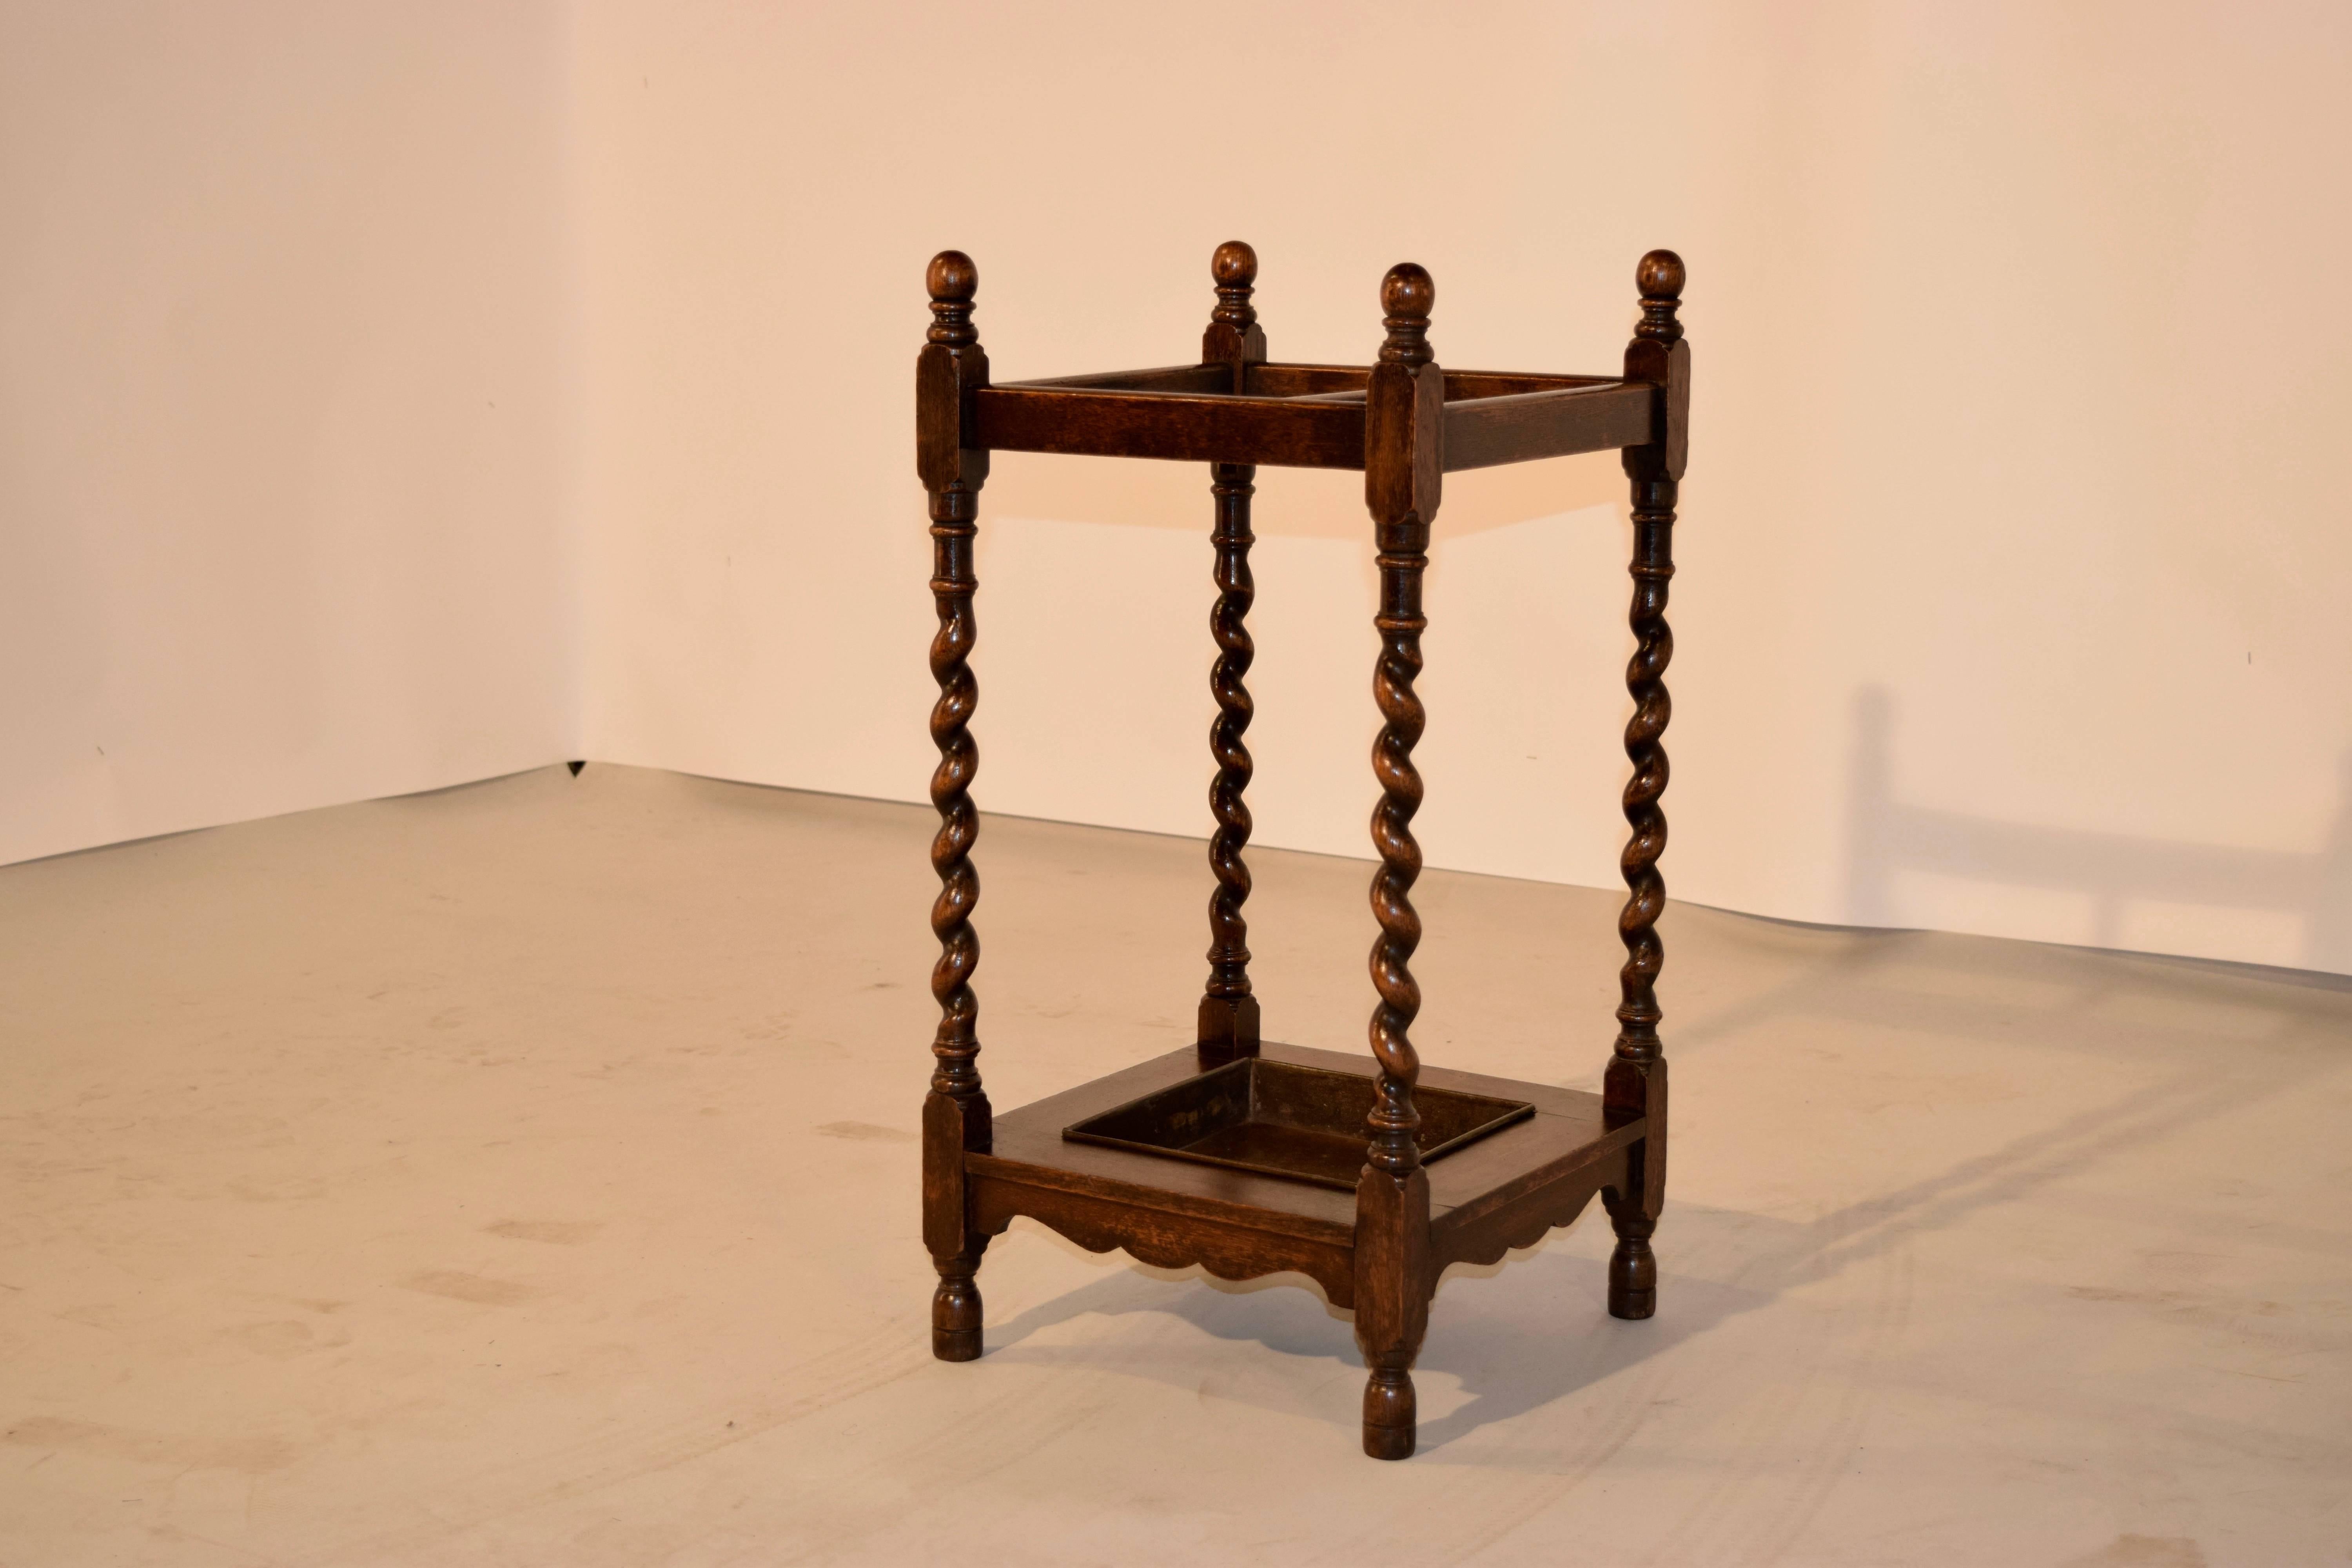 Late 19th Century English oak umbrella stand with hand-turned finials on the top, following down to hand-turned barley twist legs and turned feet. The legs are joined together by simple stretchers which are scalloped at the bottom, and have a